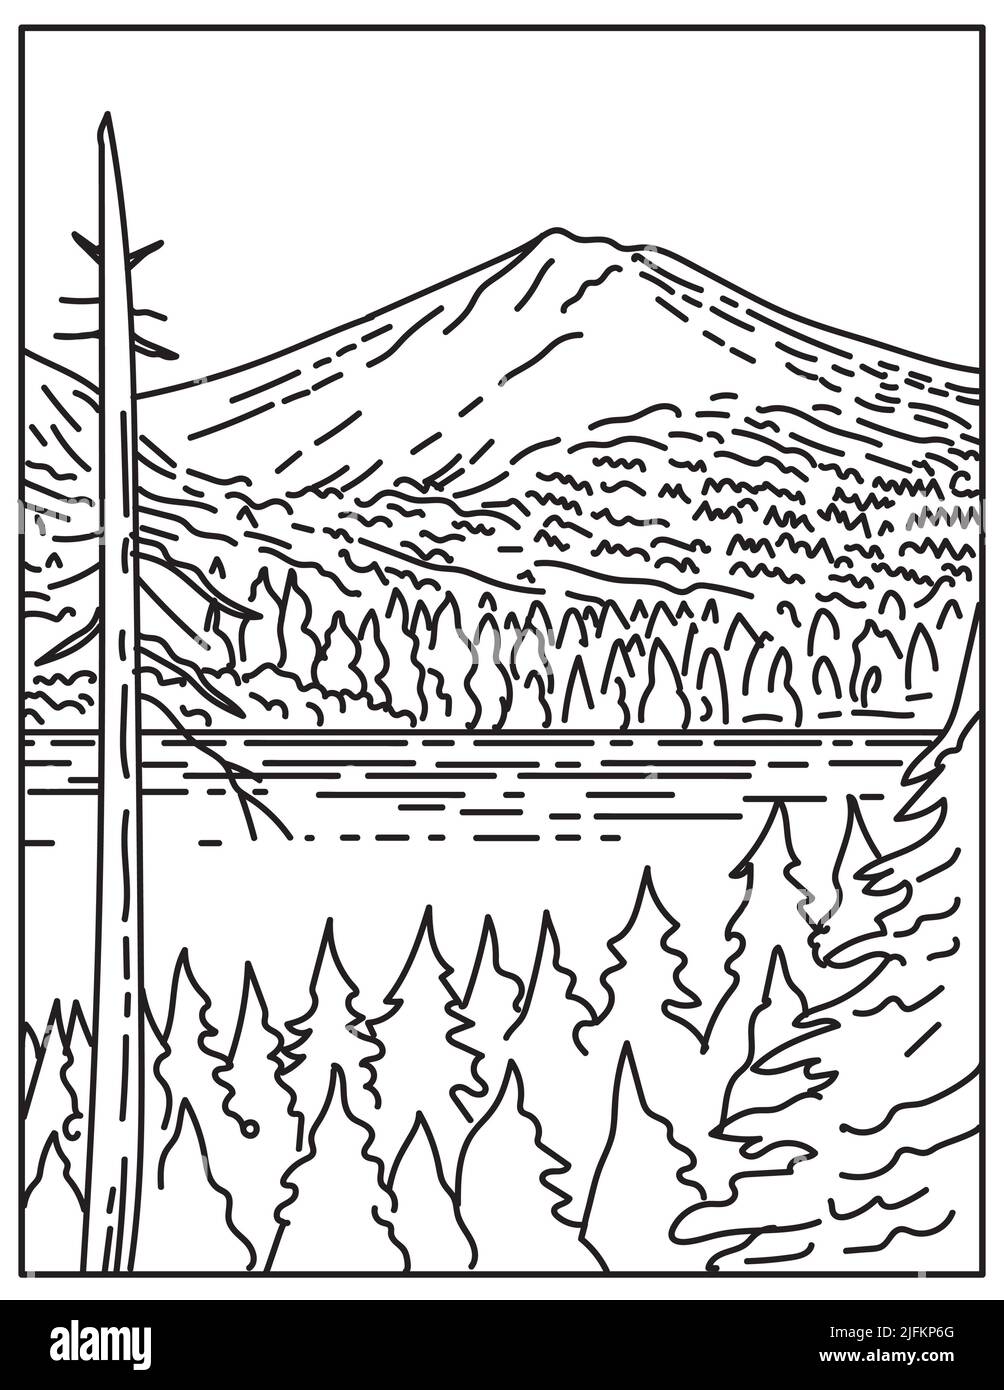 Mono line illustration of summit of Lassen Peak Volcano within Lassen Volcanic National Park in northern California, United States of America done in Stock Photo